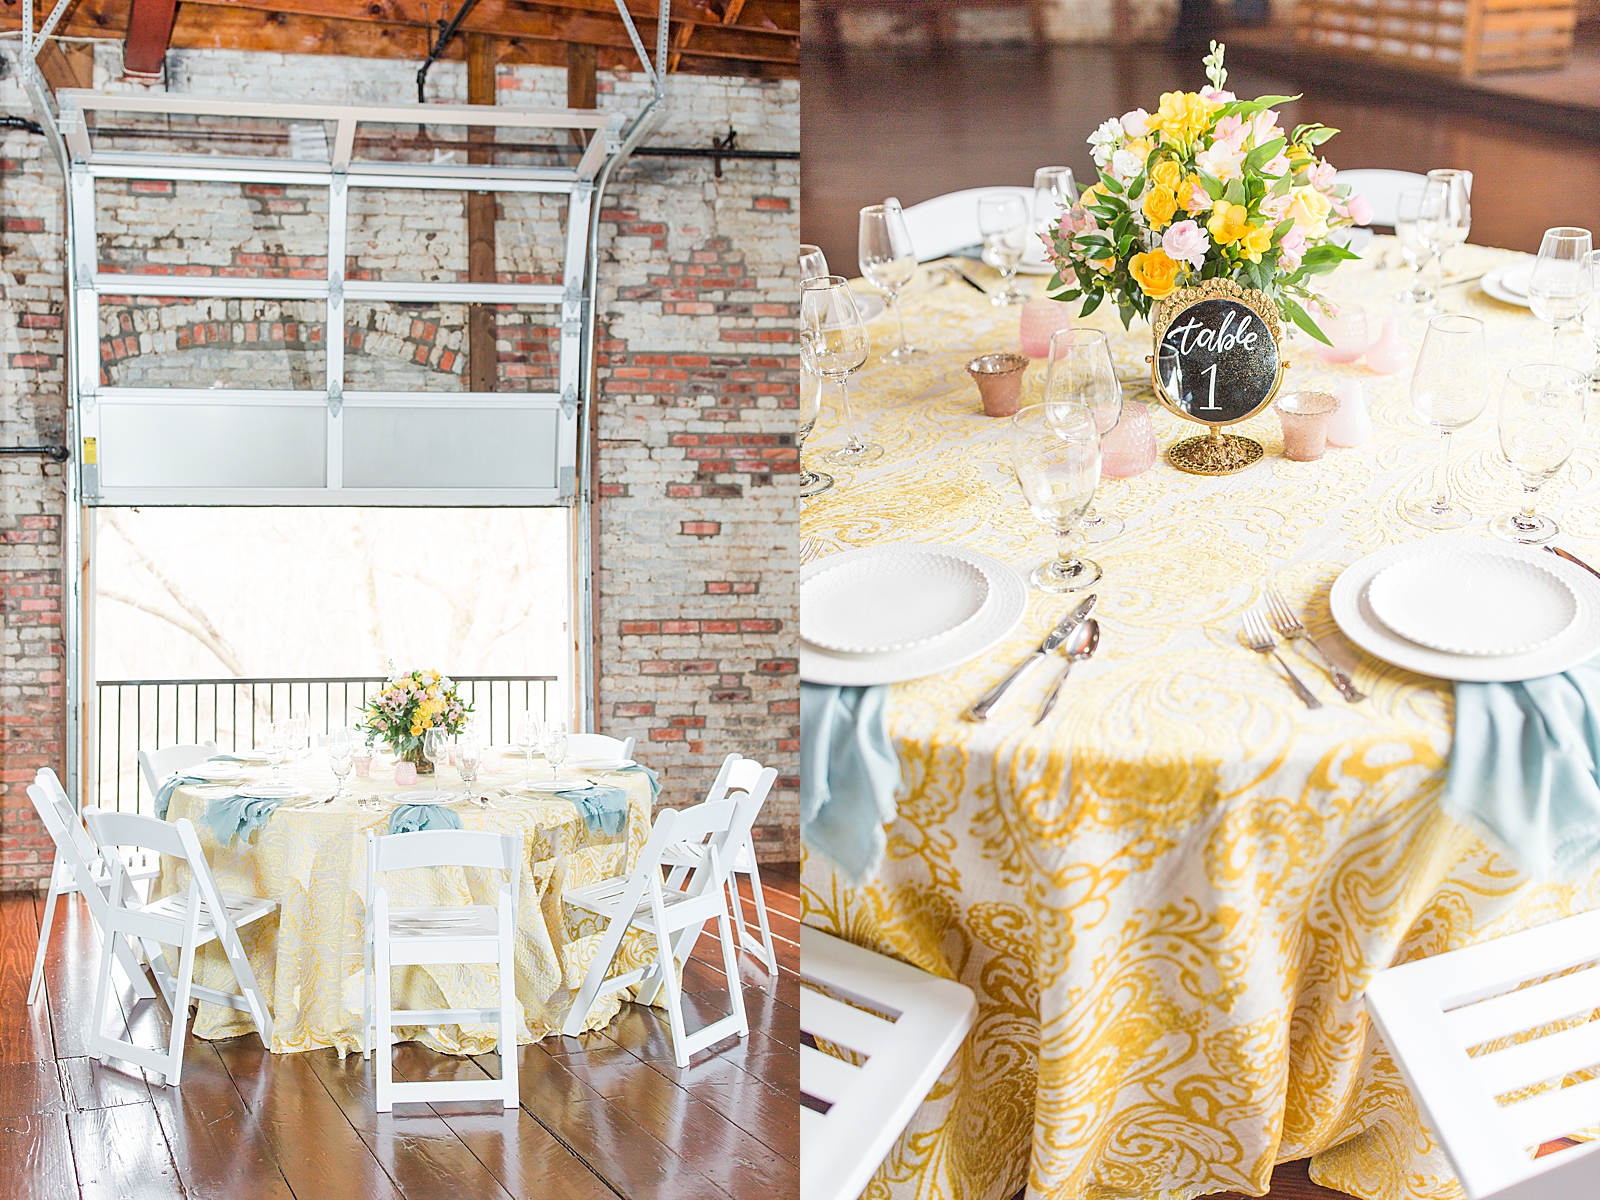 Hackney Warehouse Wedding Reception tables with yellow table cloth and white plates Photos